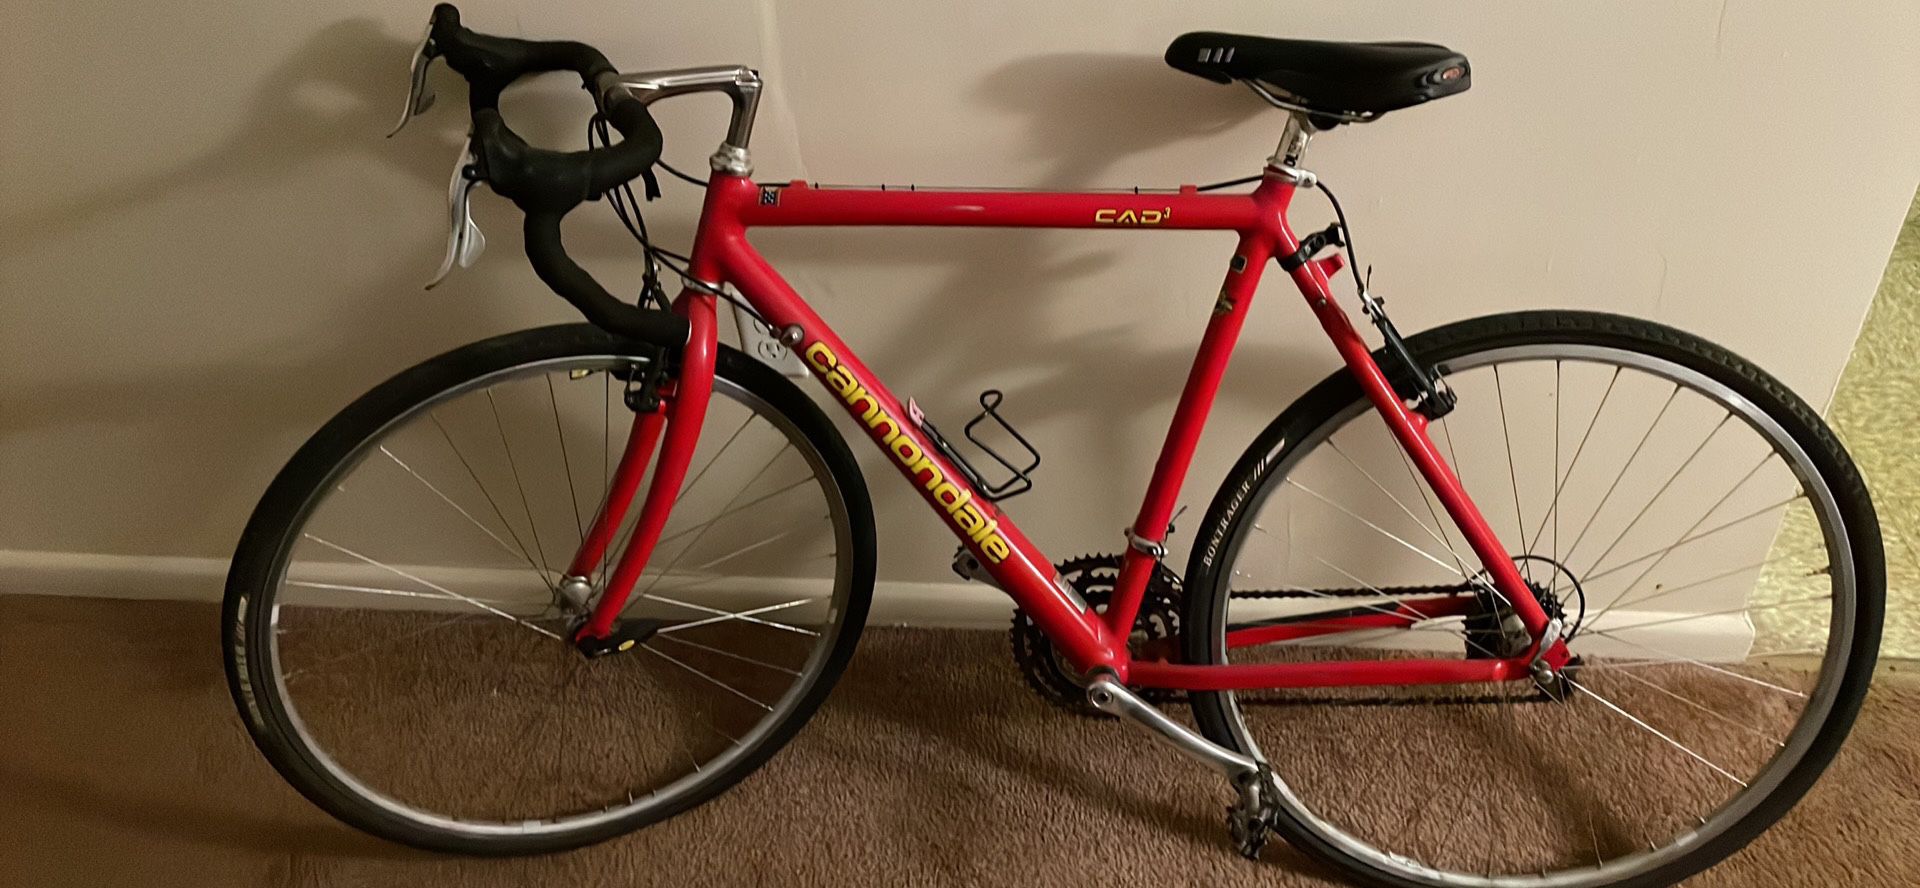 Cannondale Cad 3 Bike For Sale $300